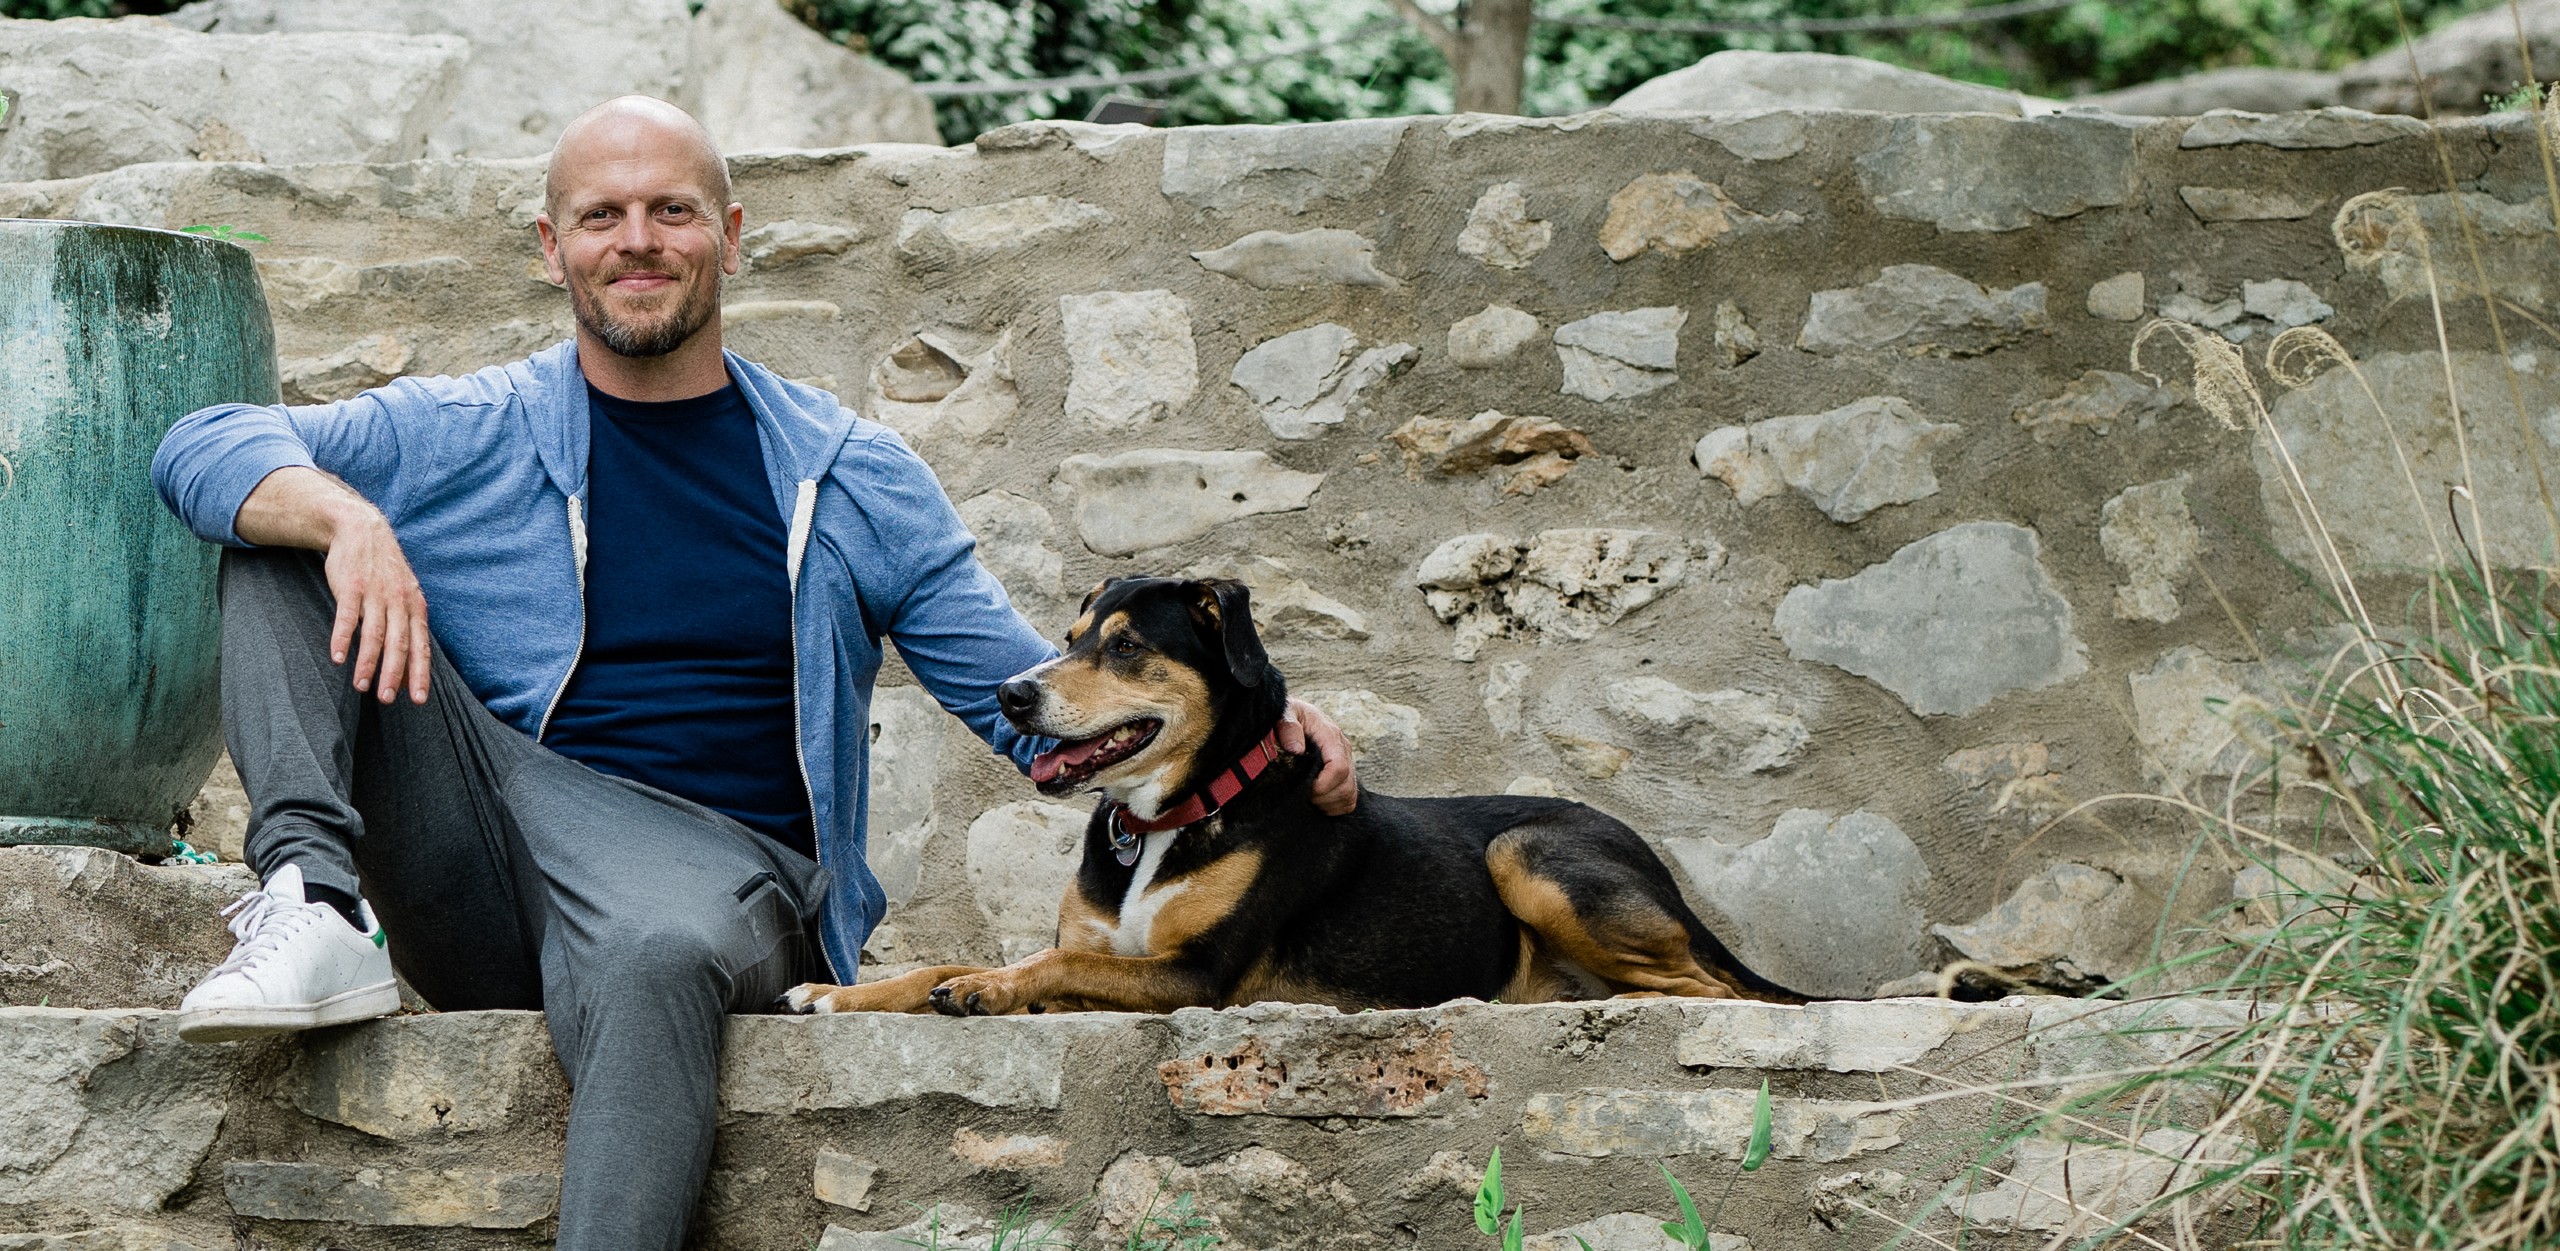 The Top 5 Reasons to Be a Jack of All Trades - The Blog of Author Tim  Ferriss